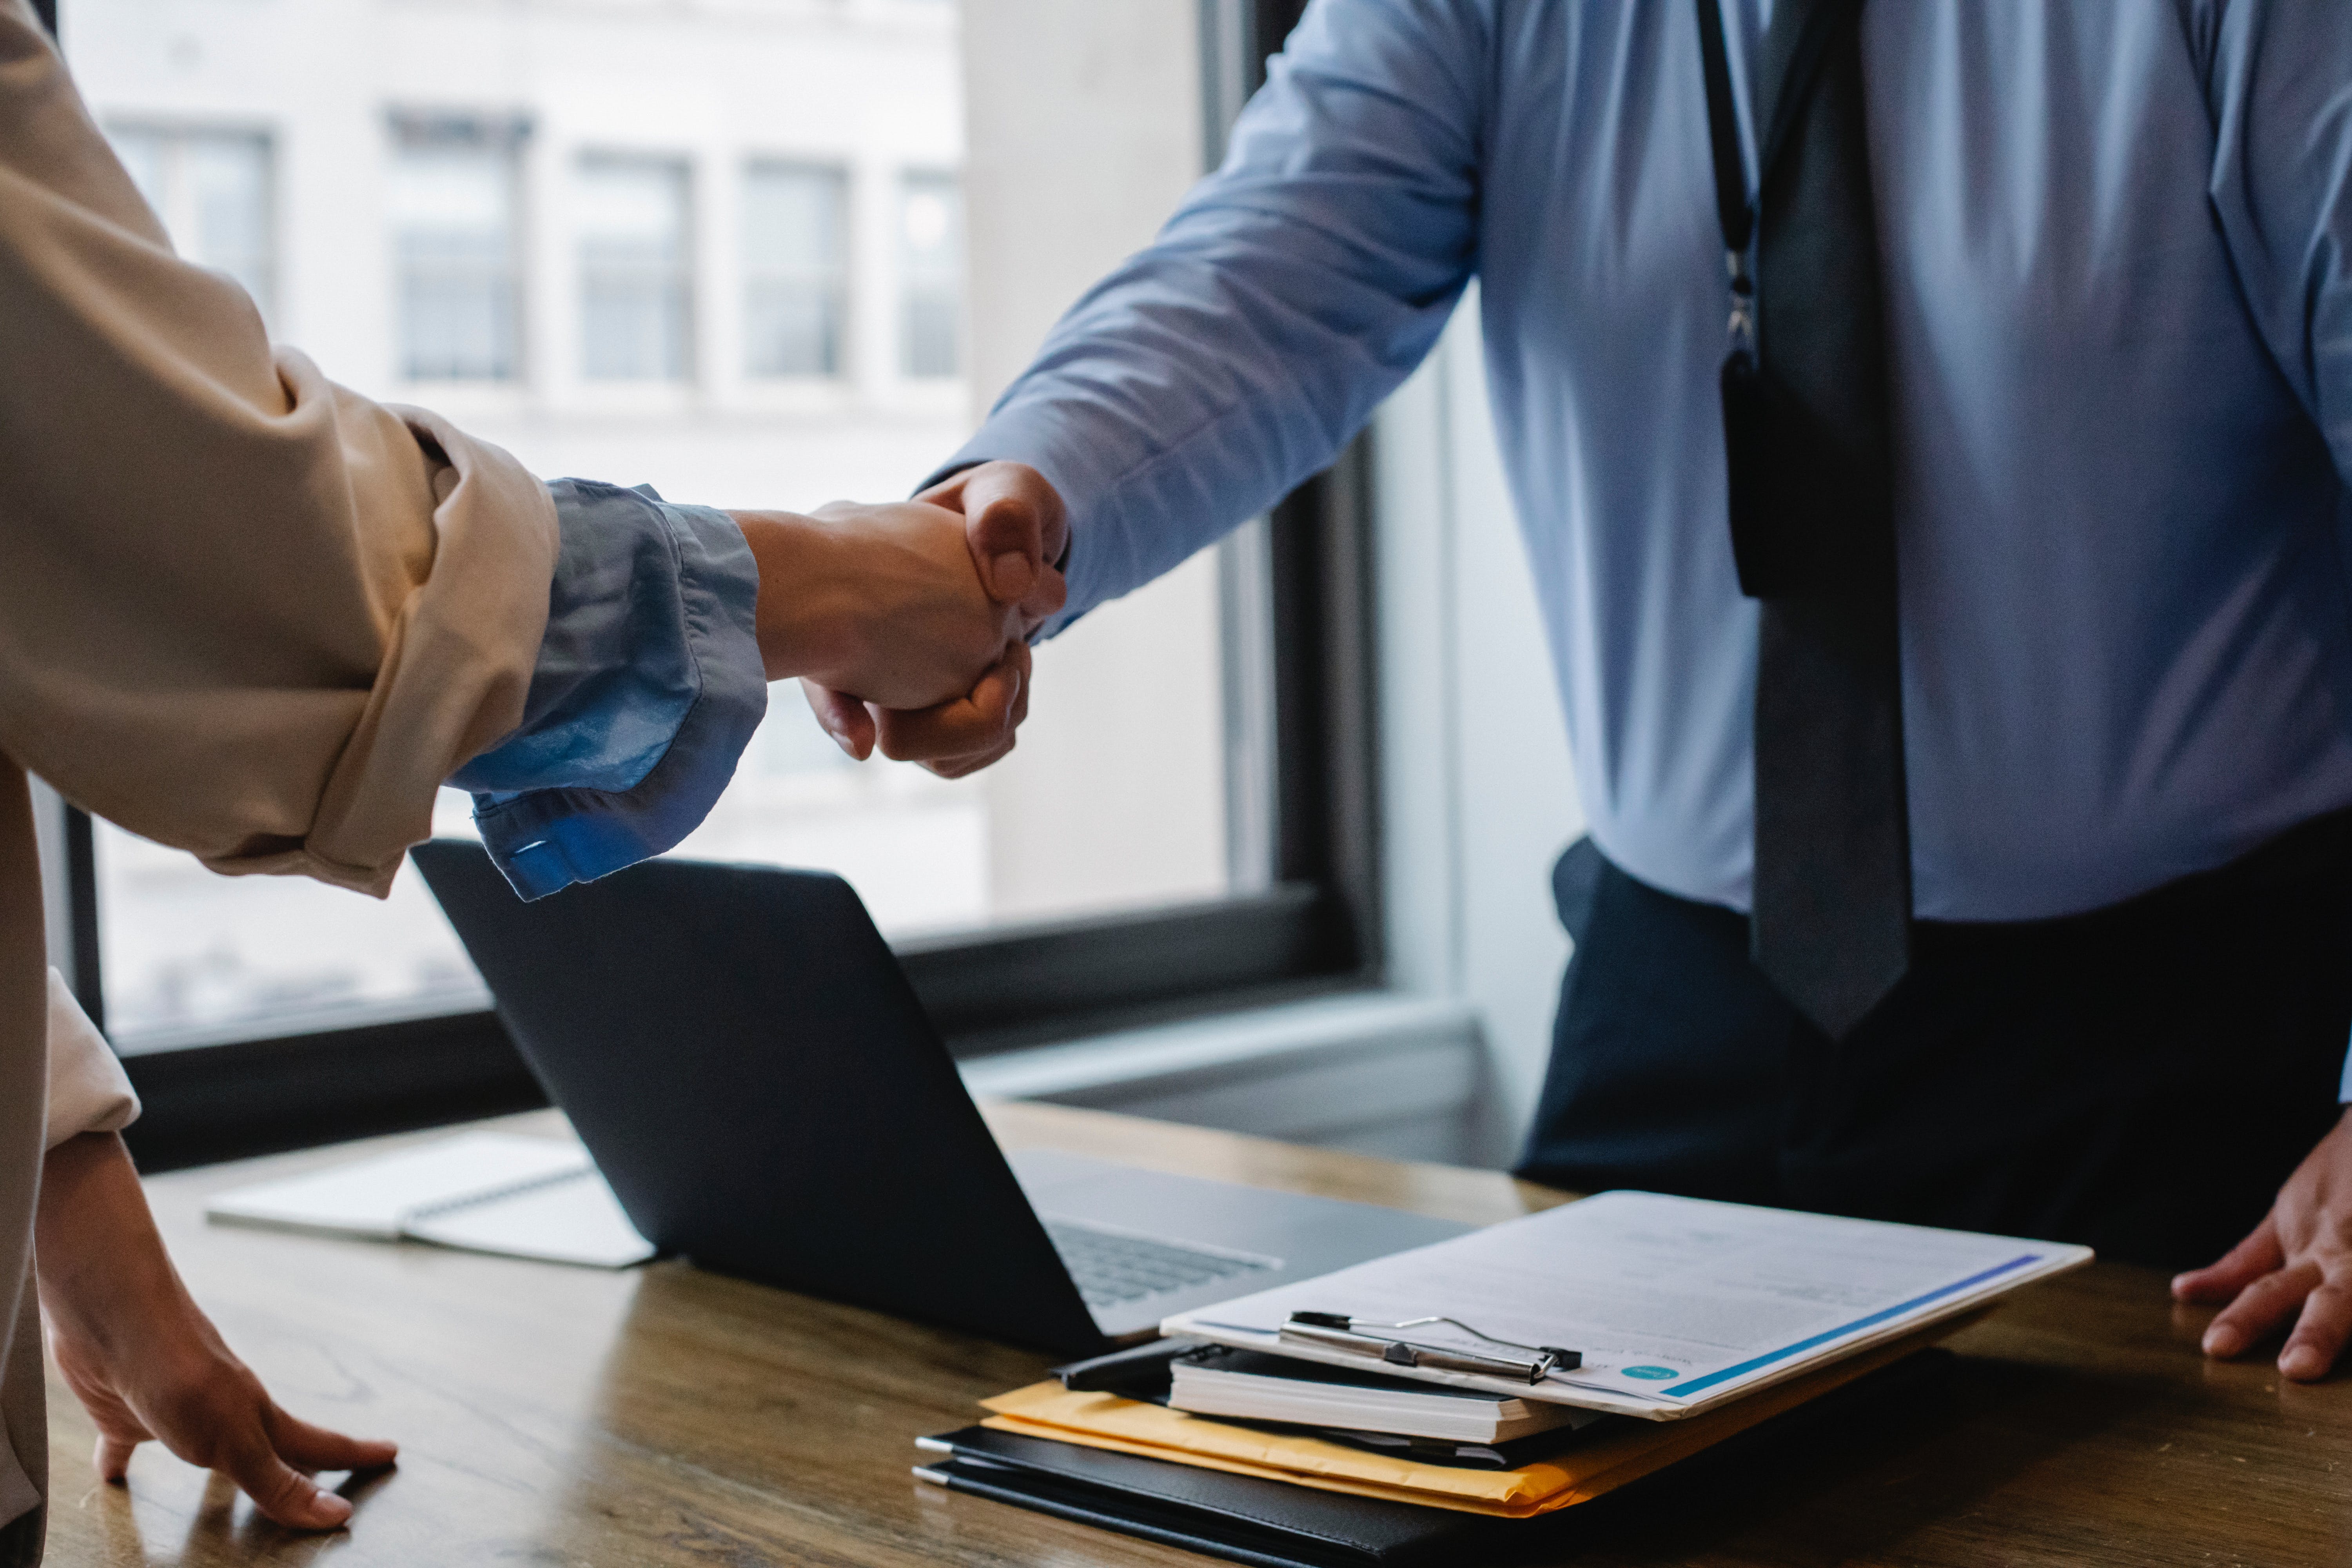 Two people shaking hands at an office | Source: Pexels